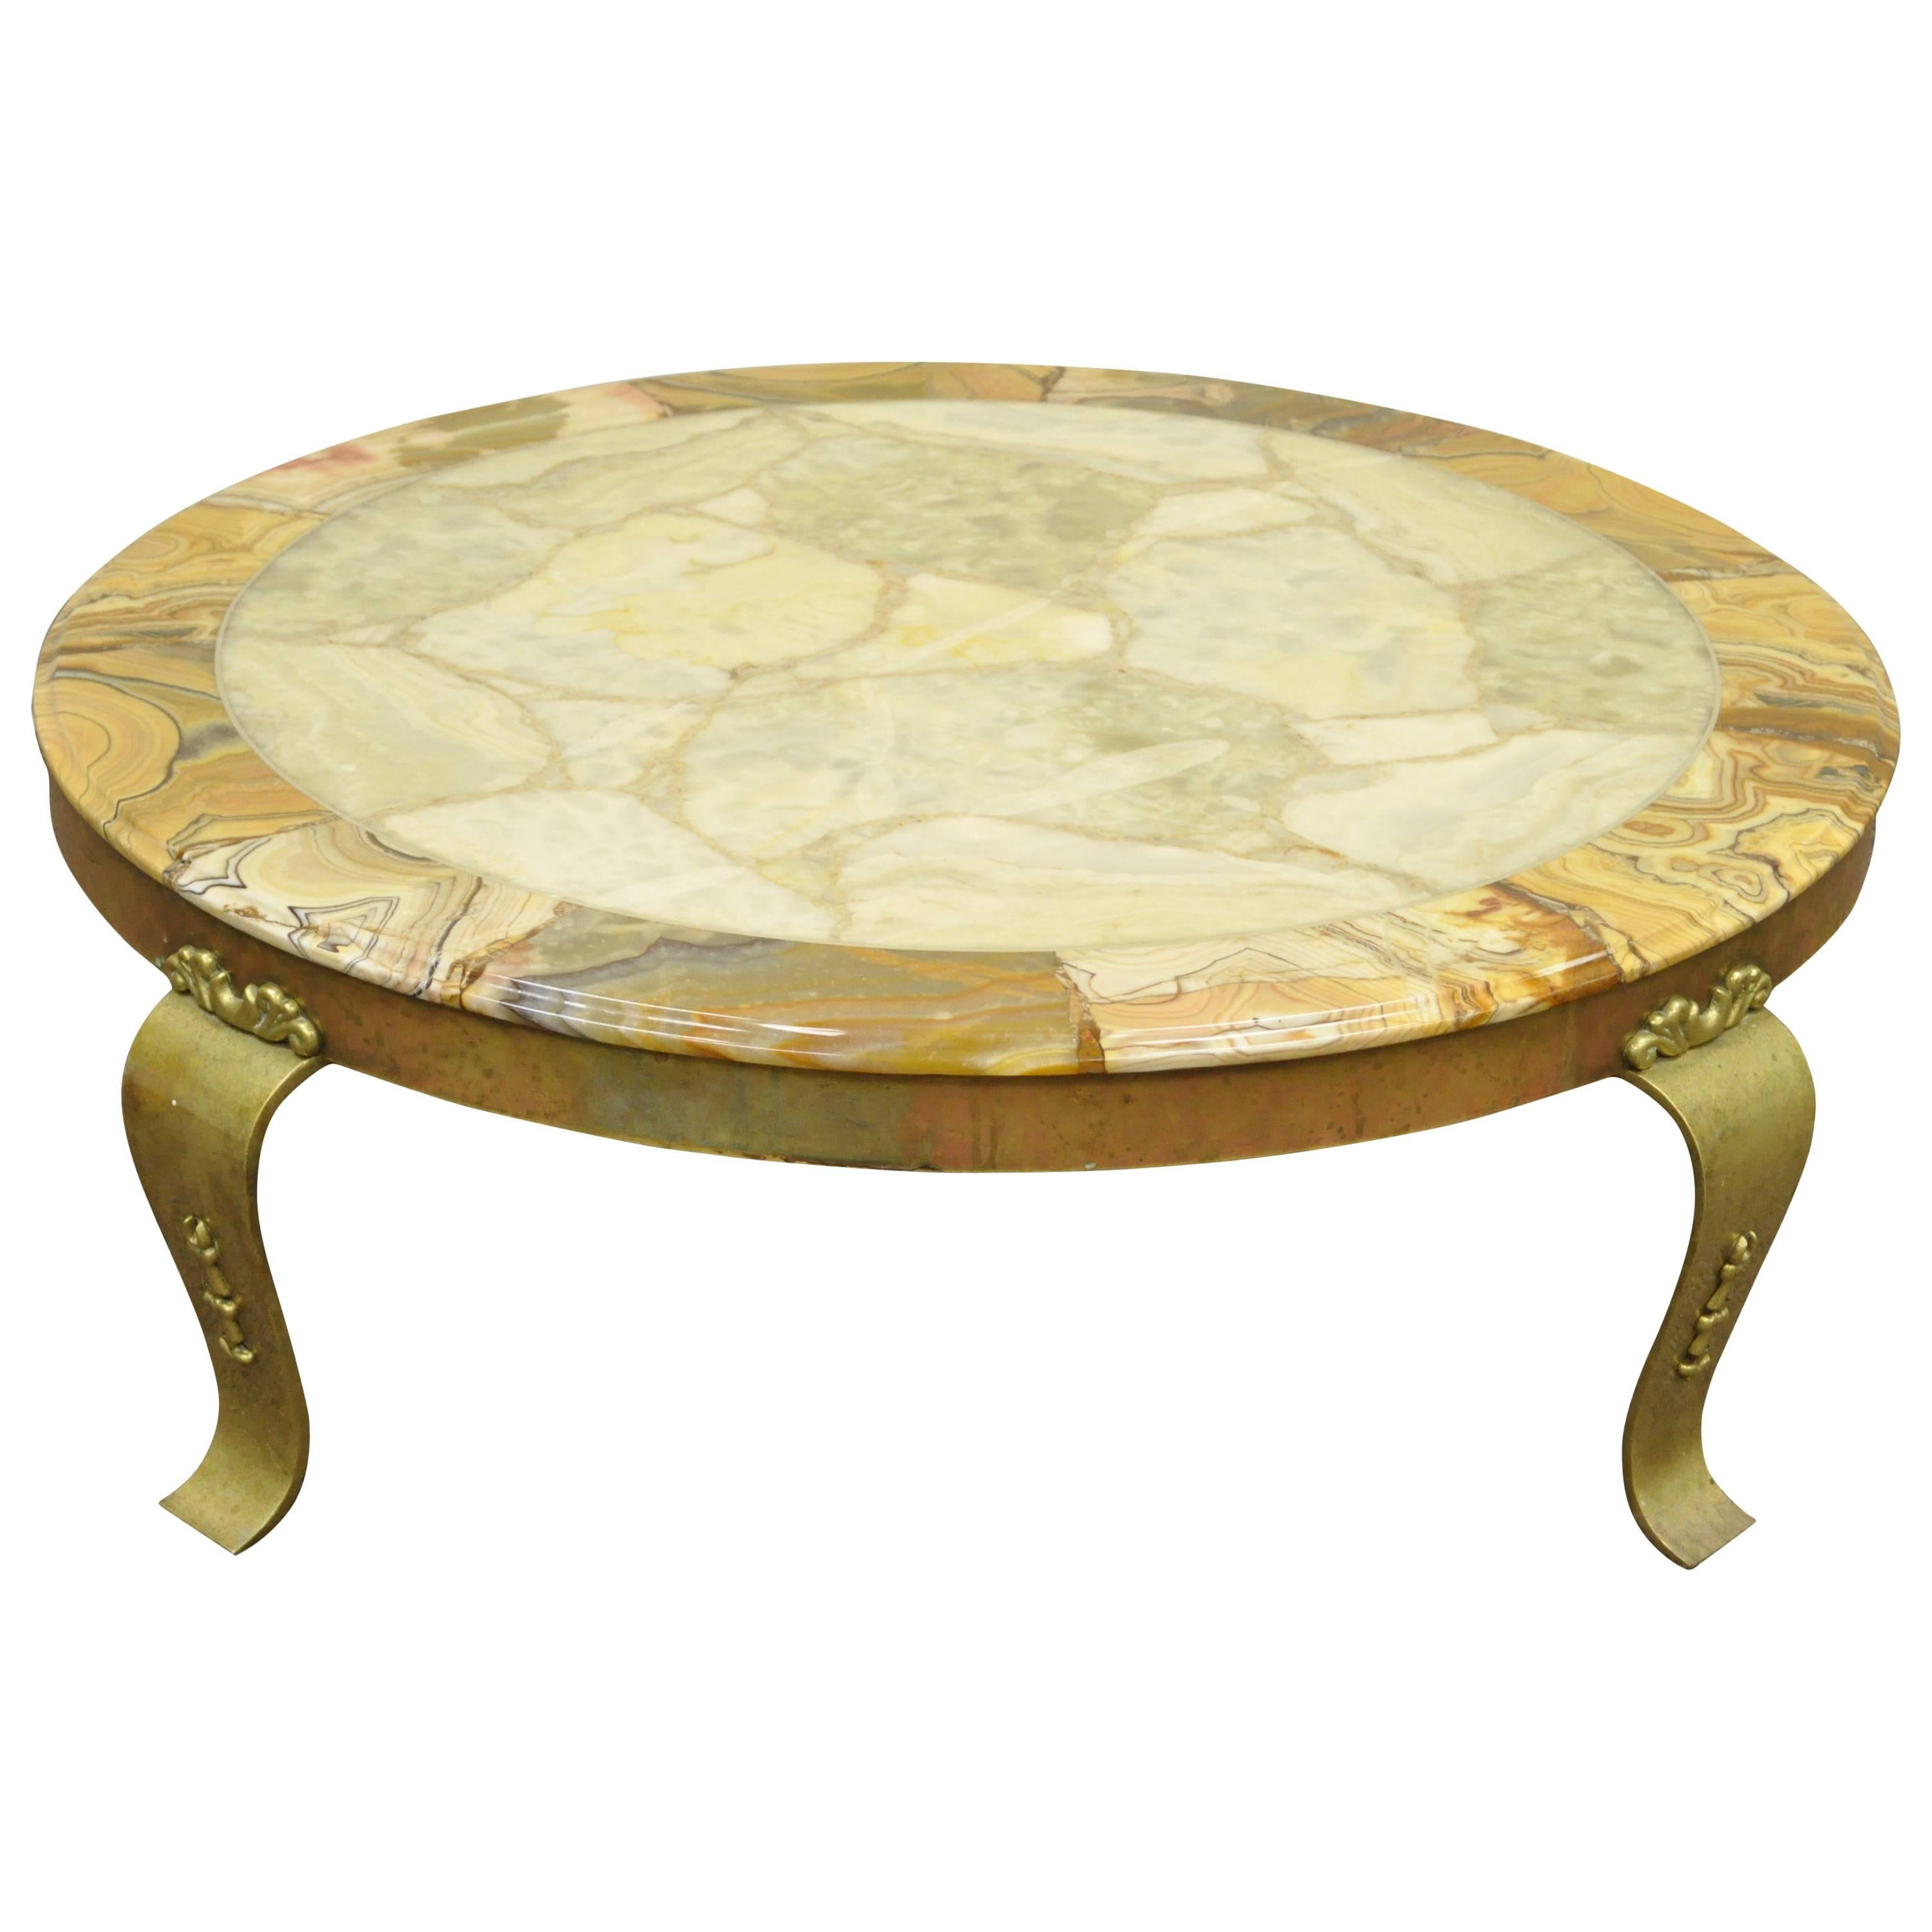 Brass and Onyx Round Coffee Table by Muller's of Mexico Attr. to Arturo Pani